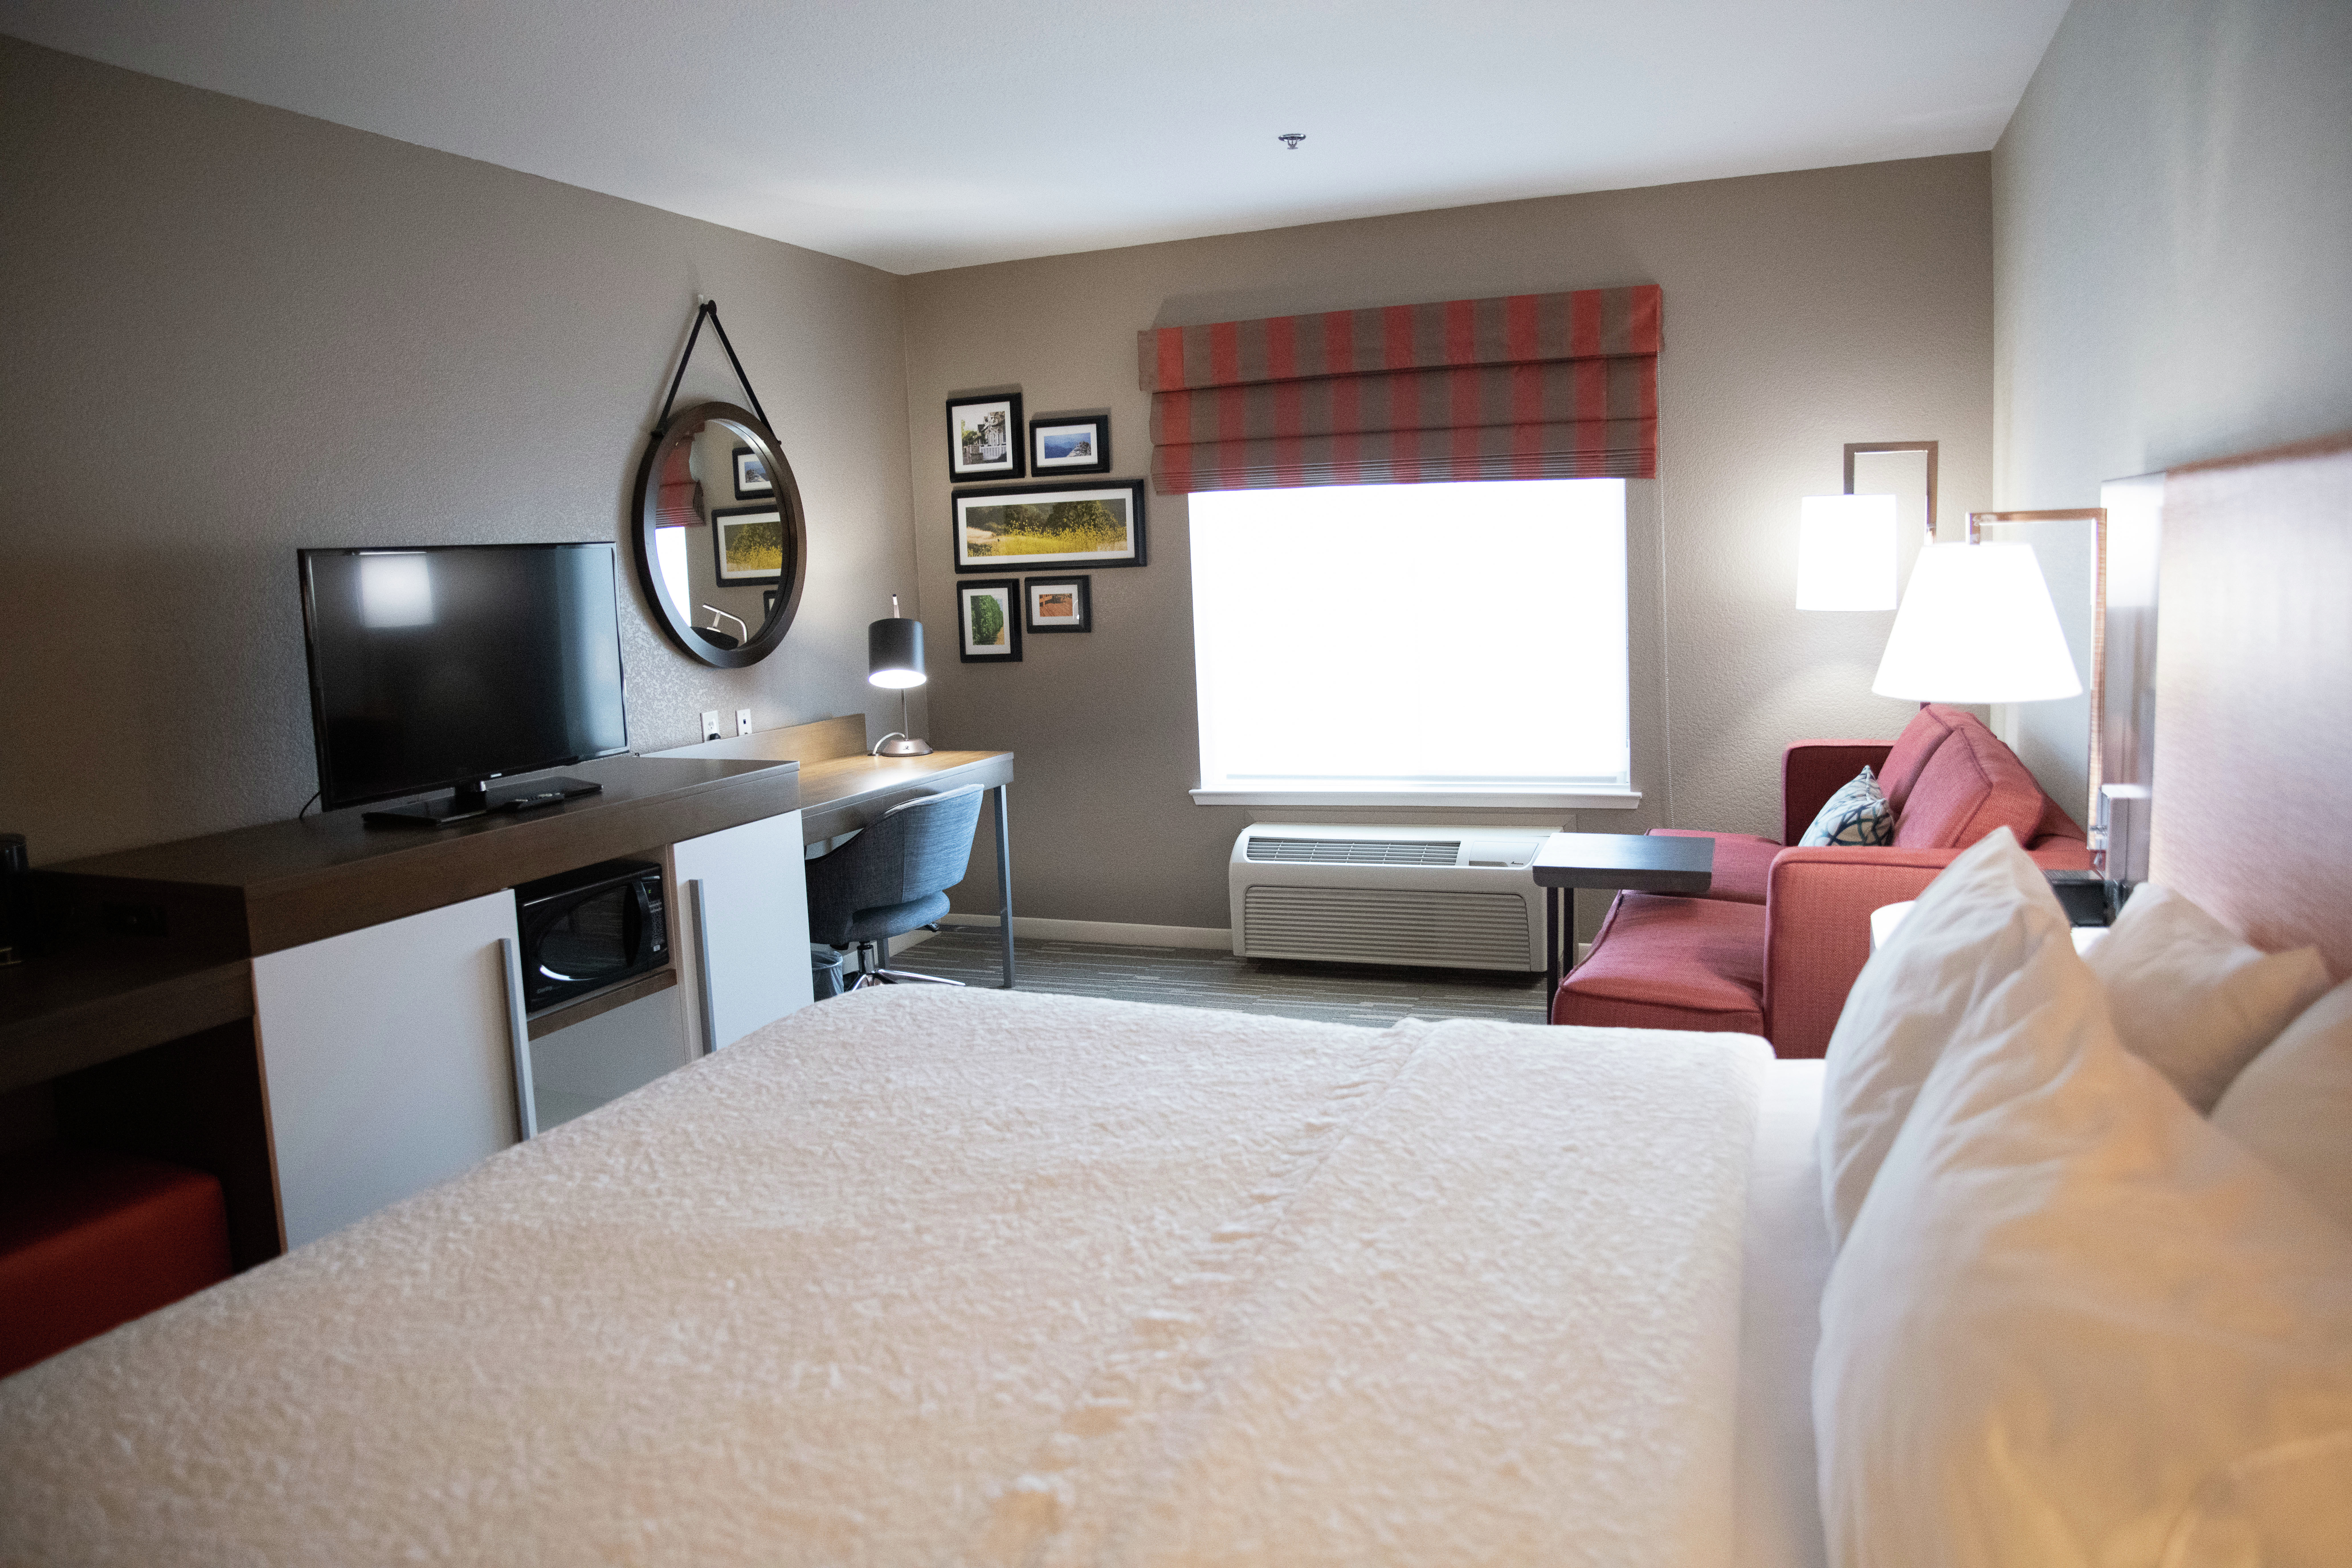 Standard King Guest Room with Television, Work Desk and Sofa